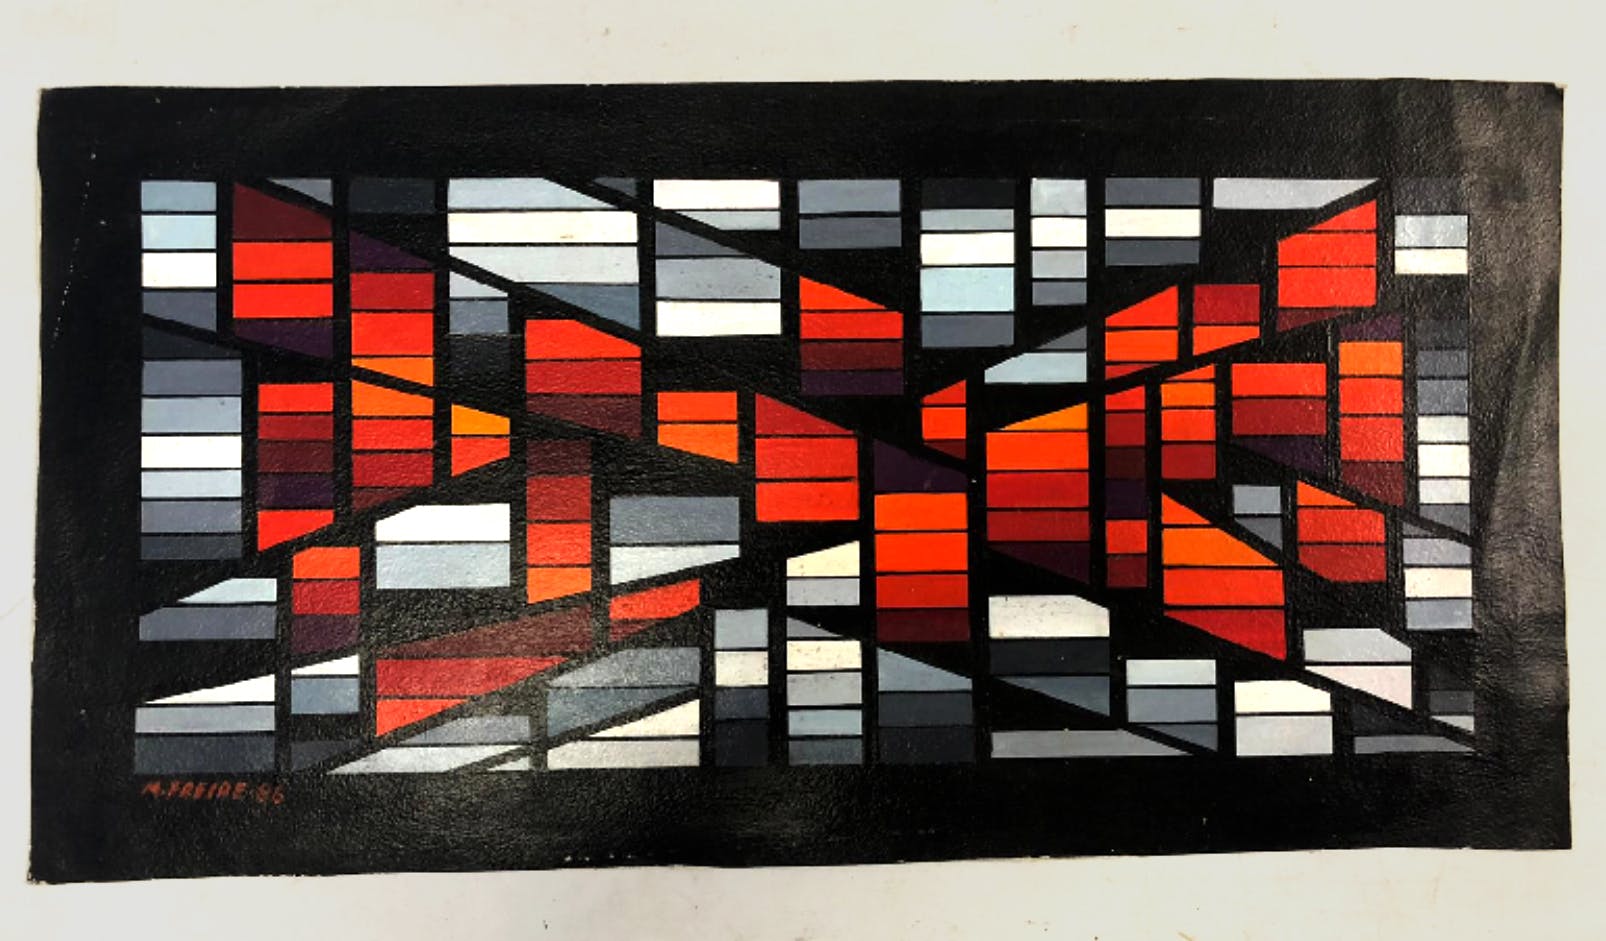 An abstract painting of red, orange, and grey rectangles.